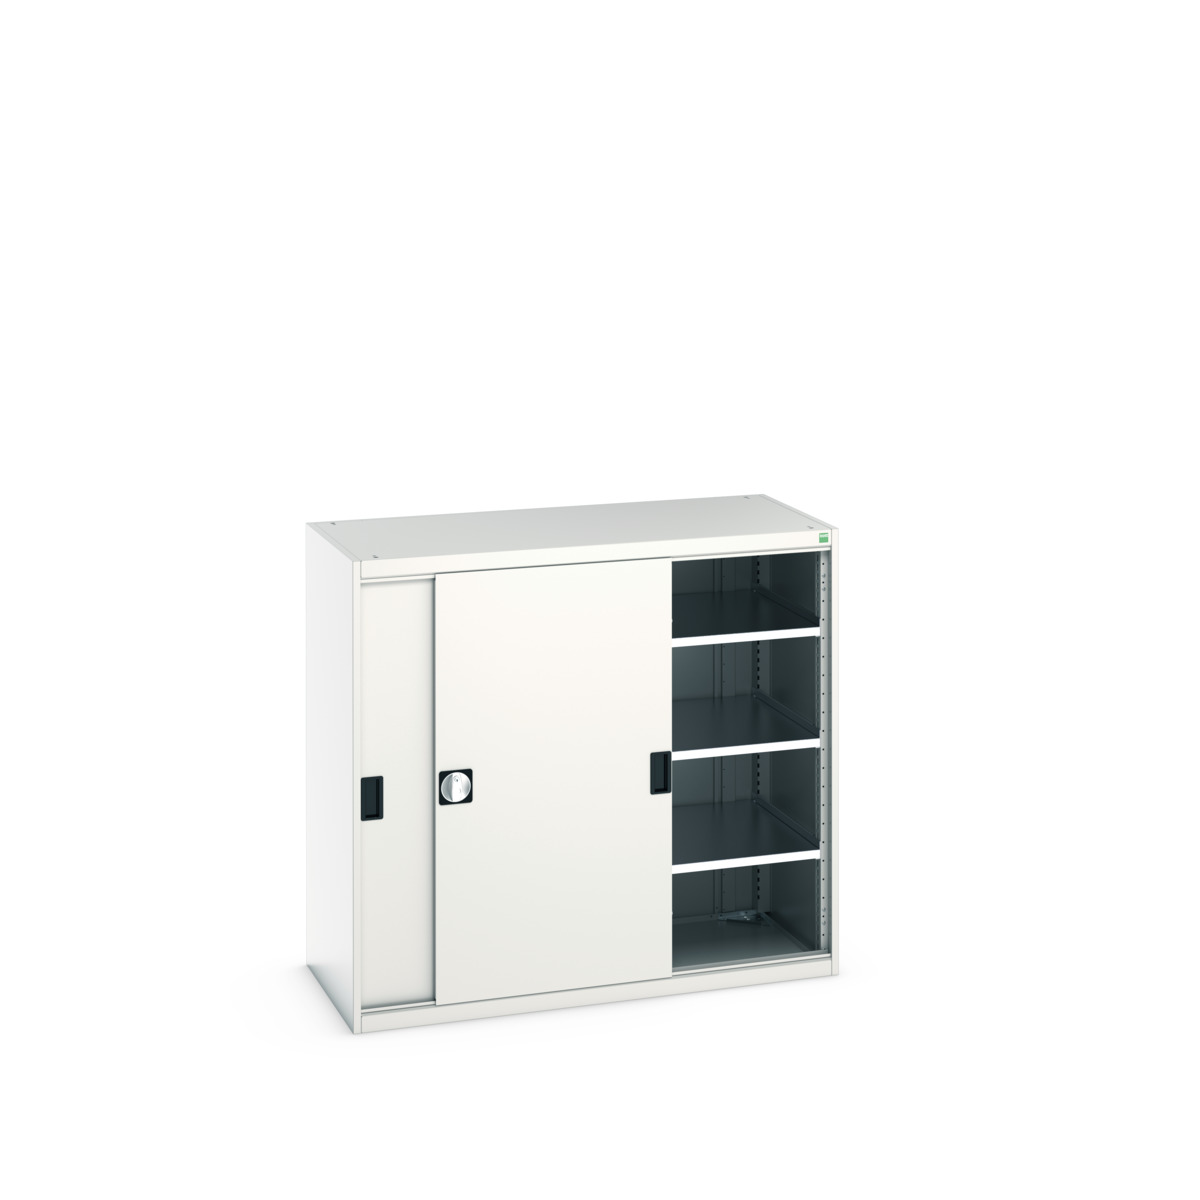 40022063.16V - Armoire Cubio SMS-13612-1.1